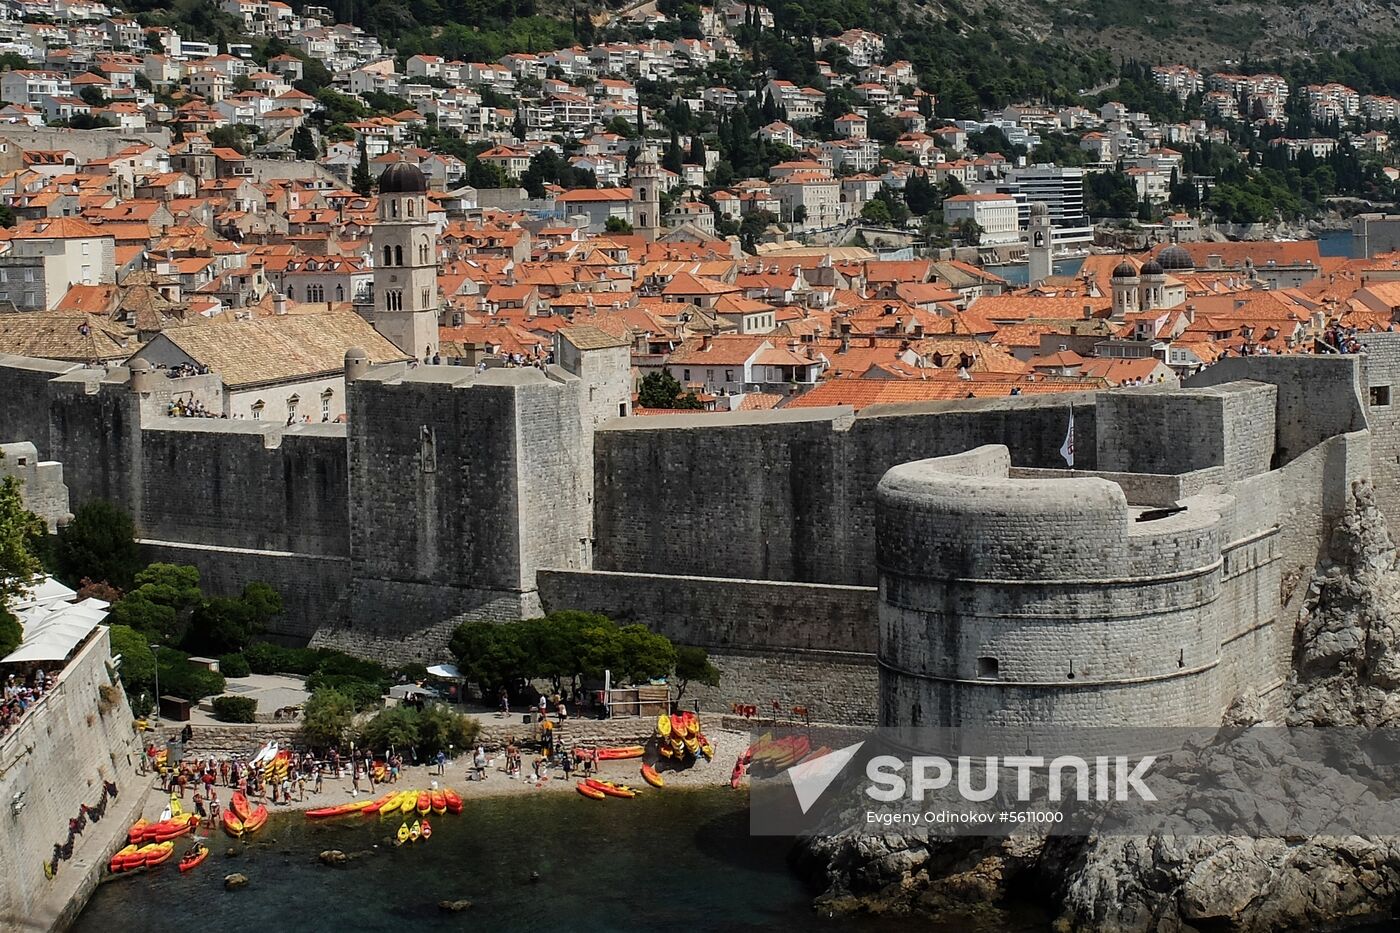 Cities of the world. Dubrovnik